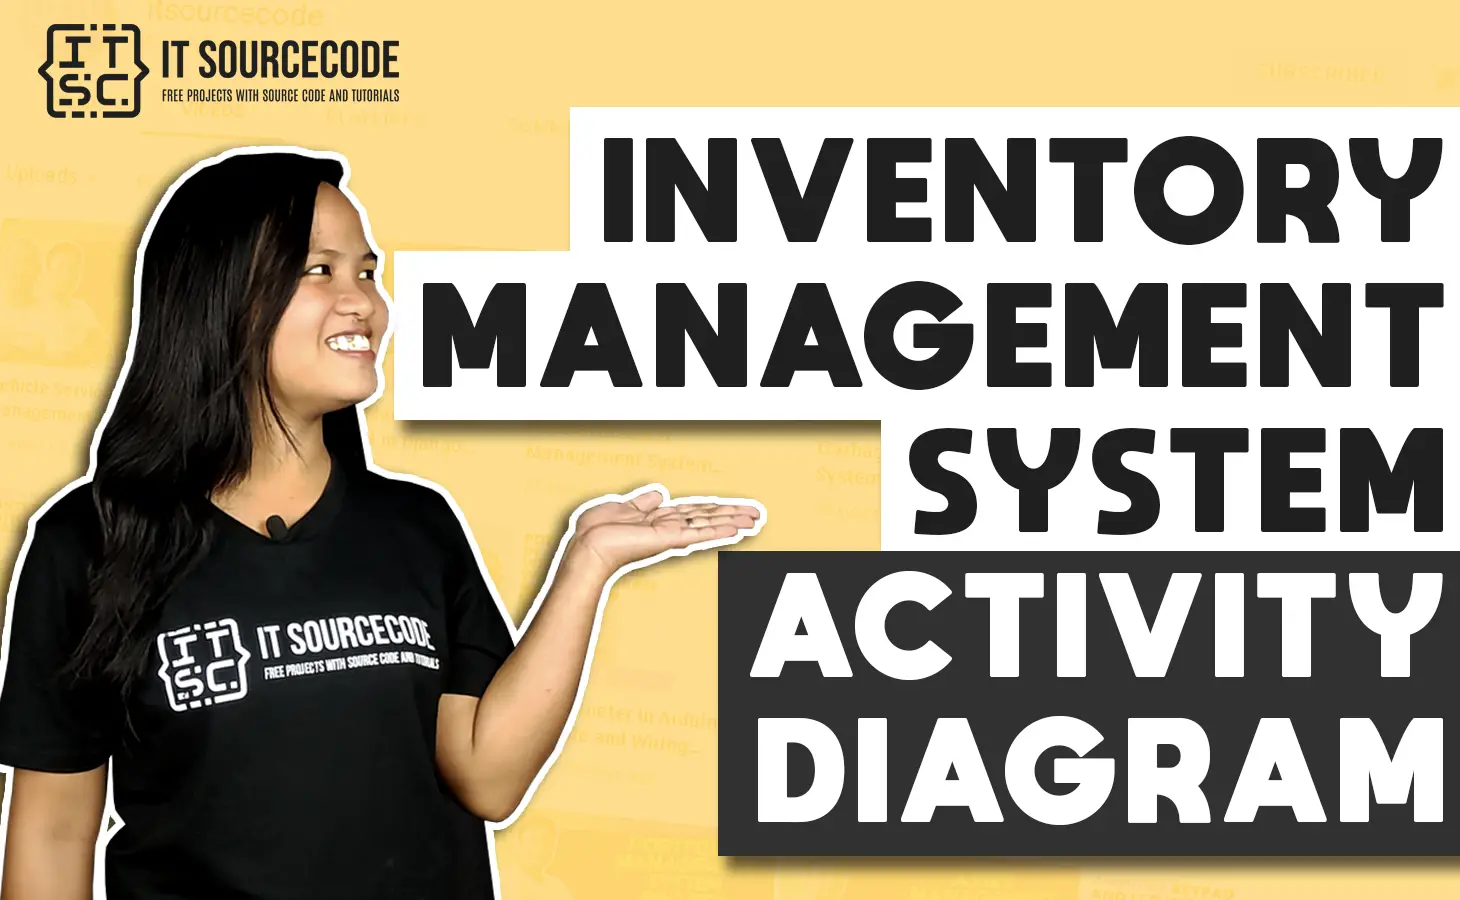 Activity Diagrams of Inventory Management System